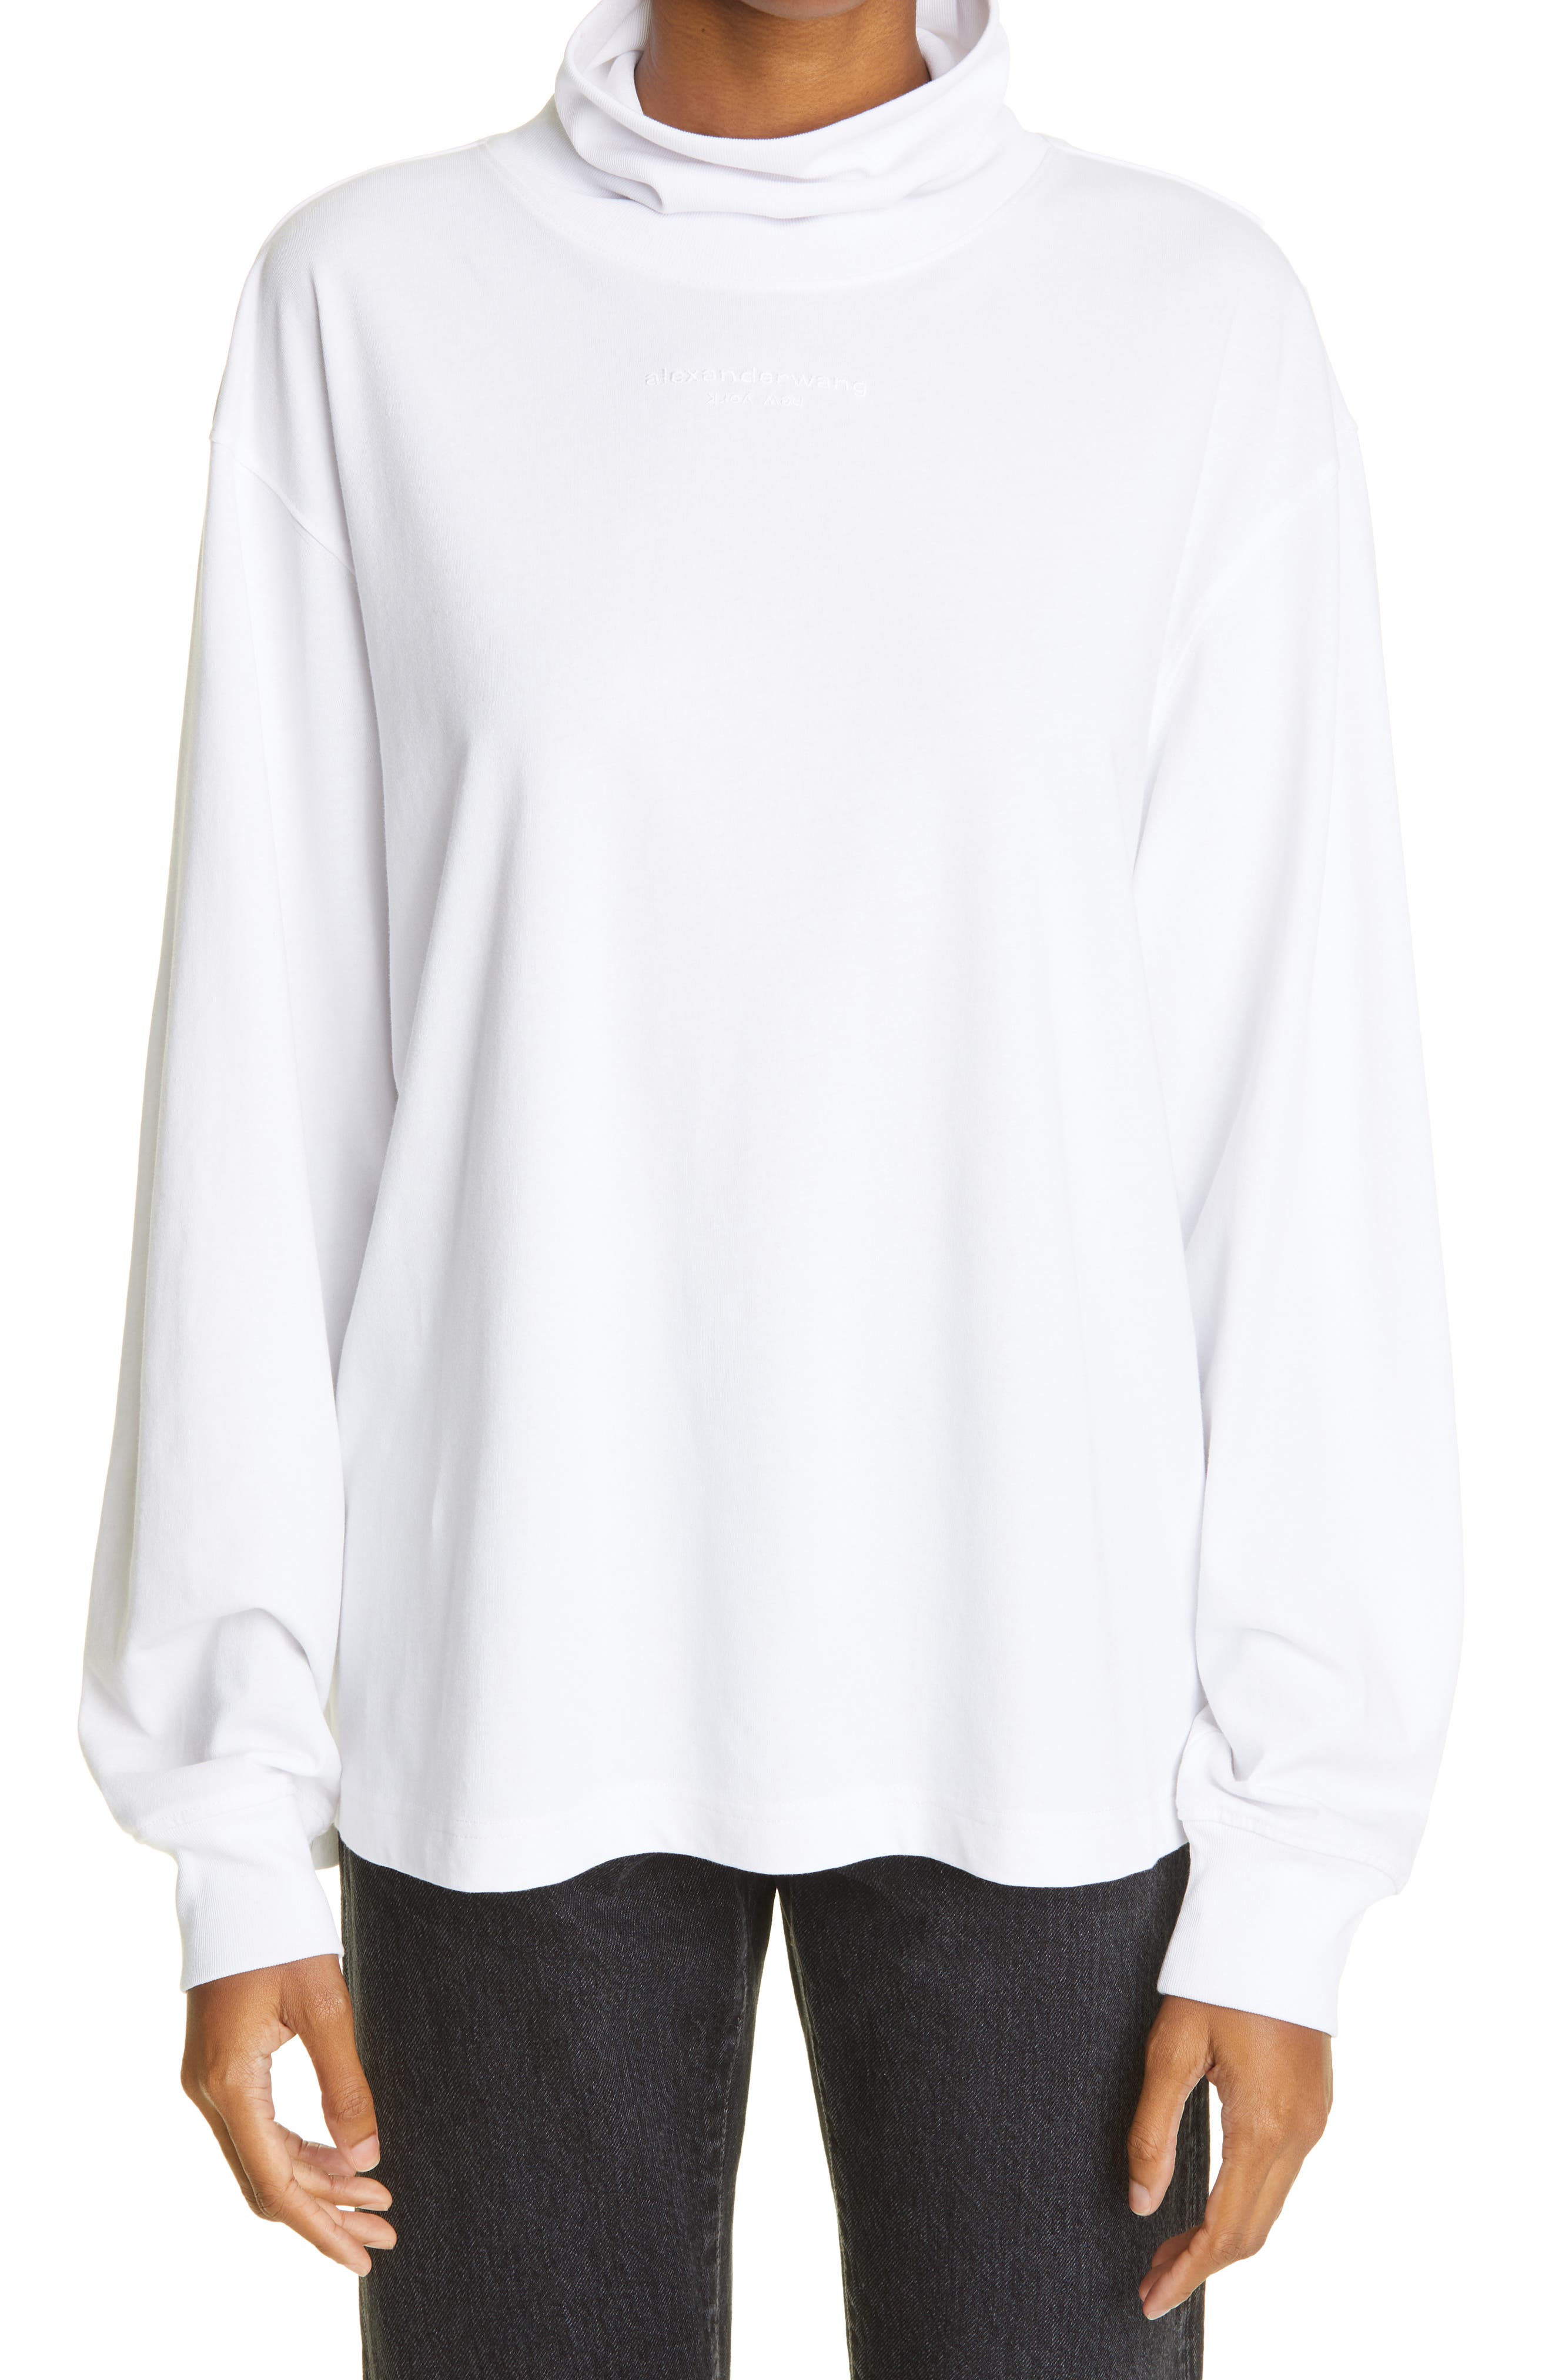 Alexander Wang Turtleneck Long Sleeve T-Shirt in White at Nordstrom, Size X-Large